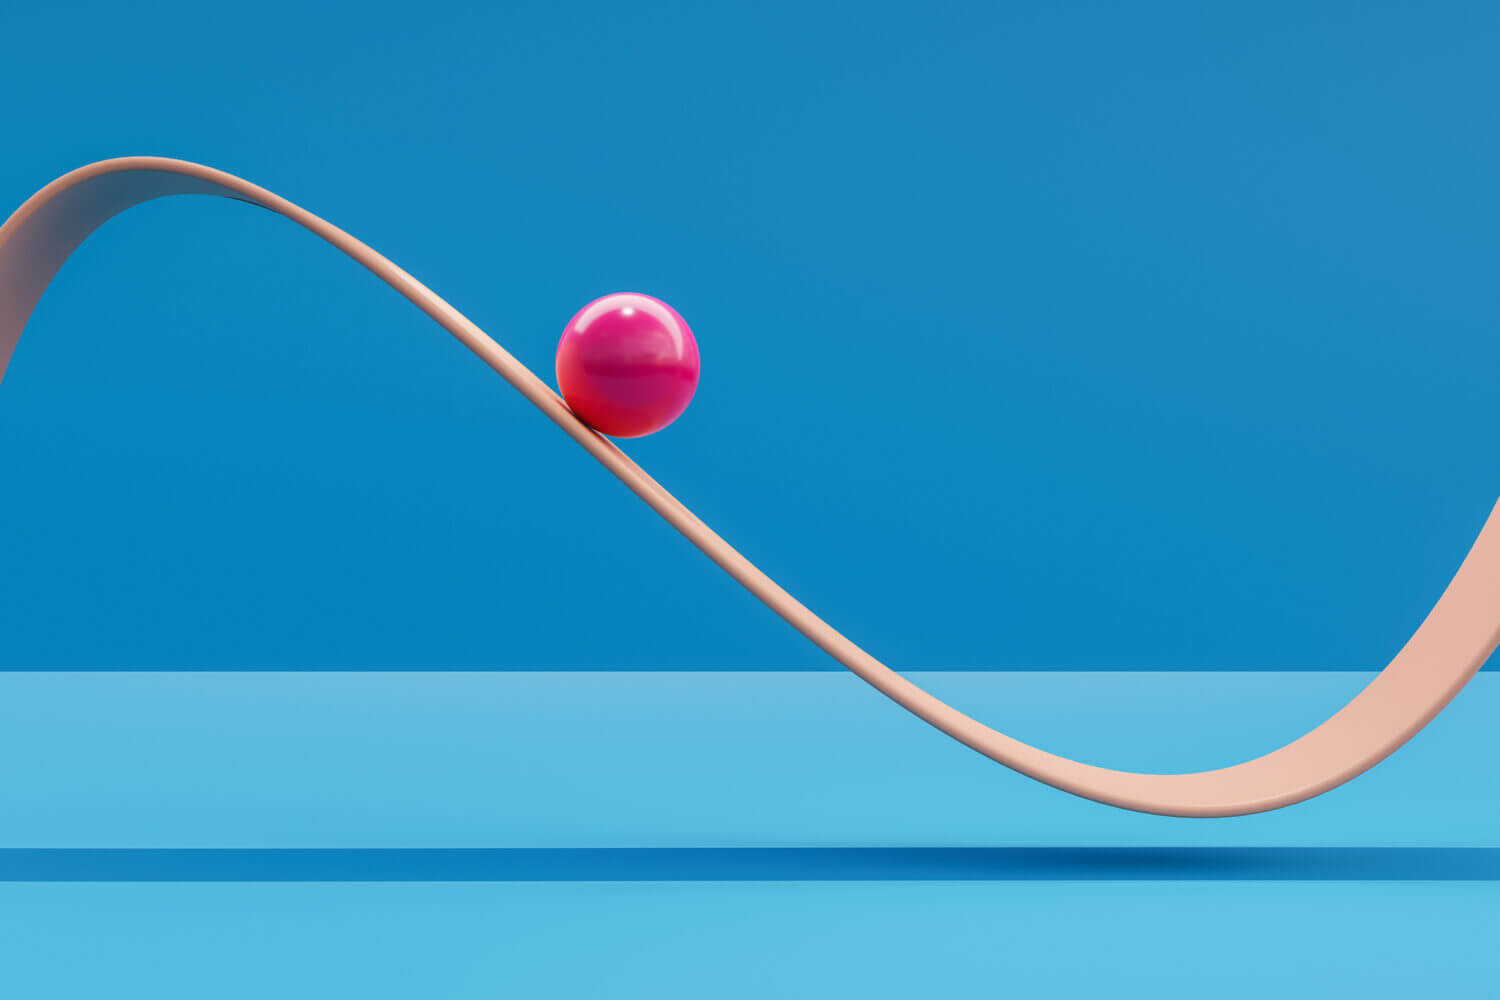 Computer generated image of pink sphere rolling down a plane like a roller coaster.